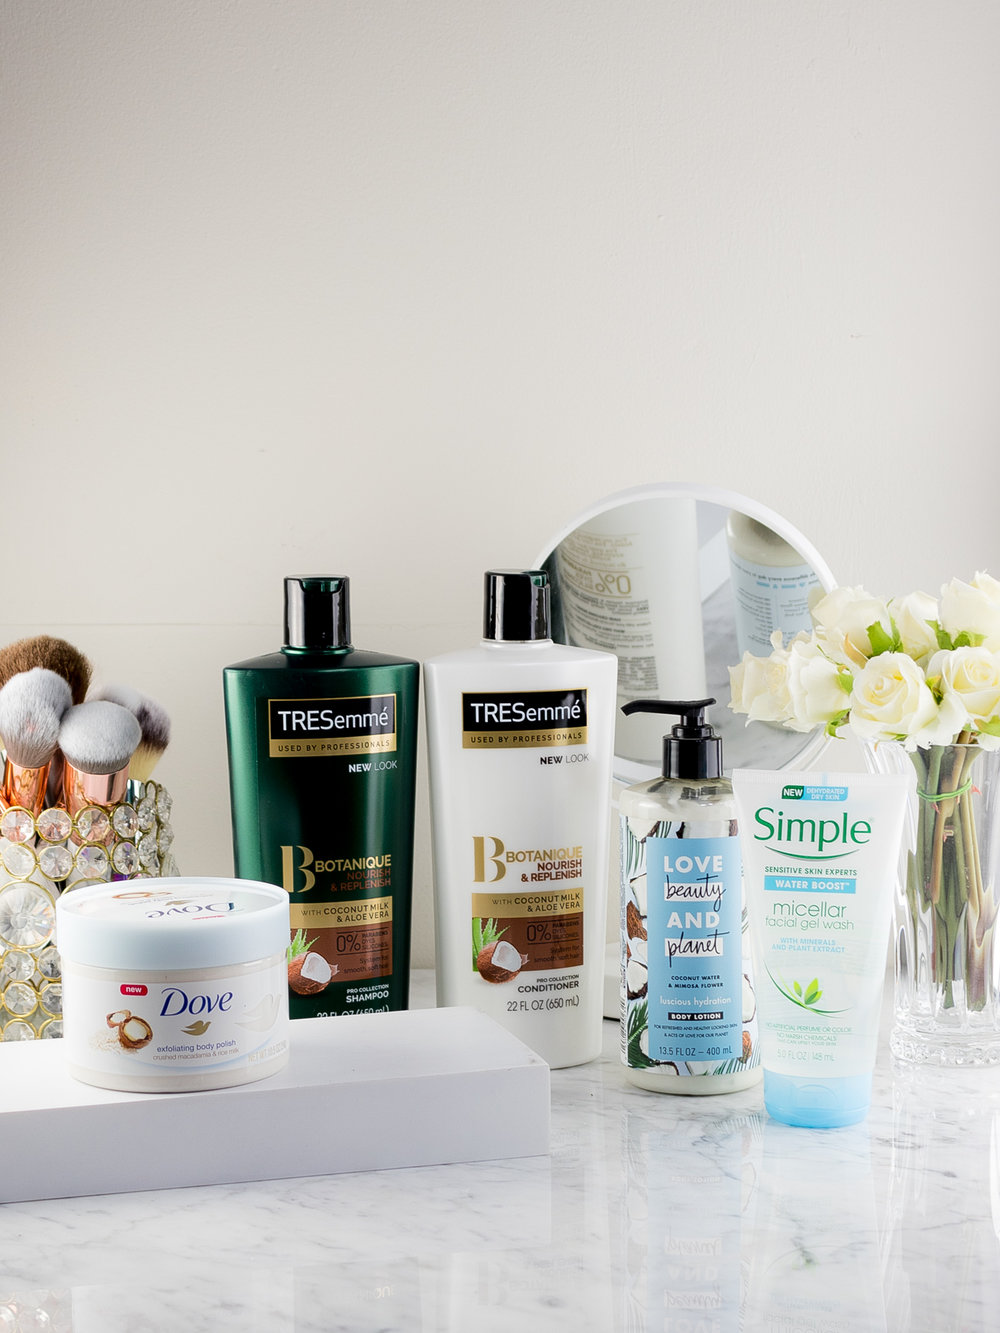 A NEW Personal Care Routine for Spring with Unilever Products